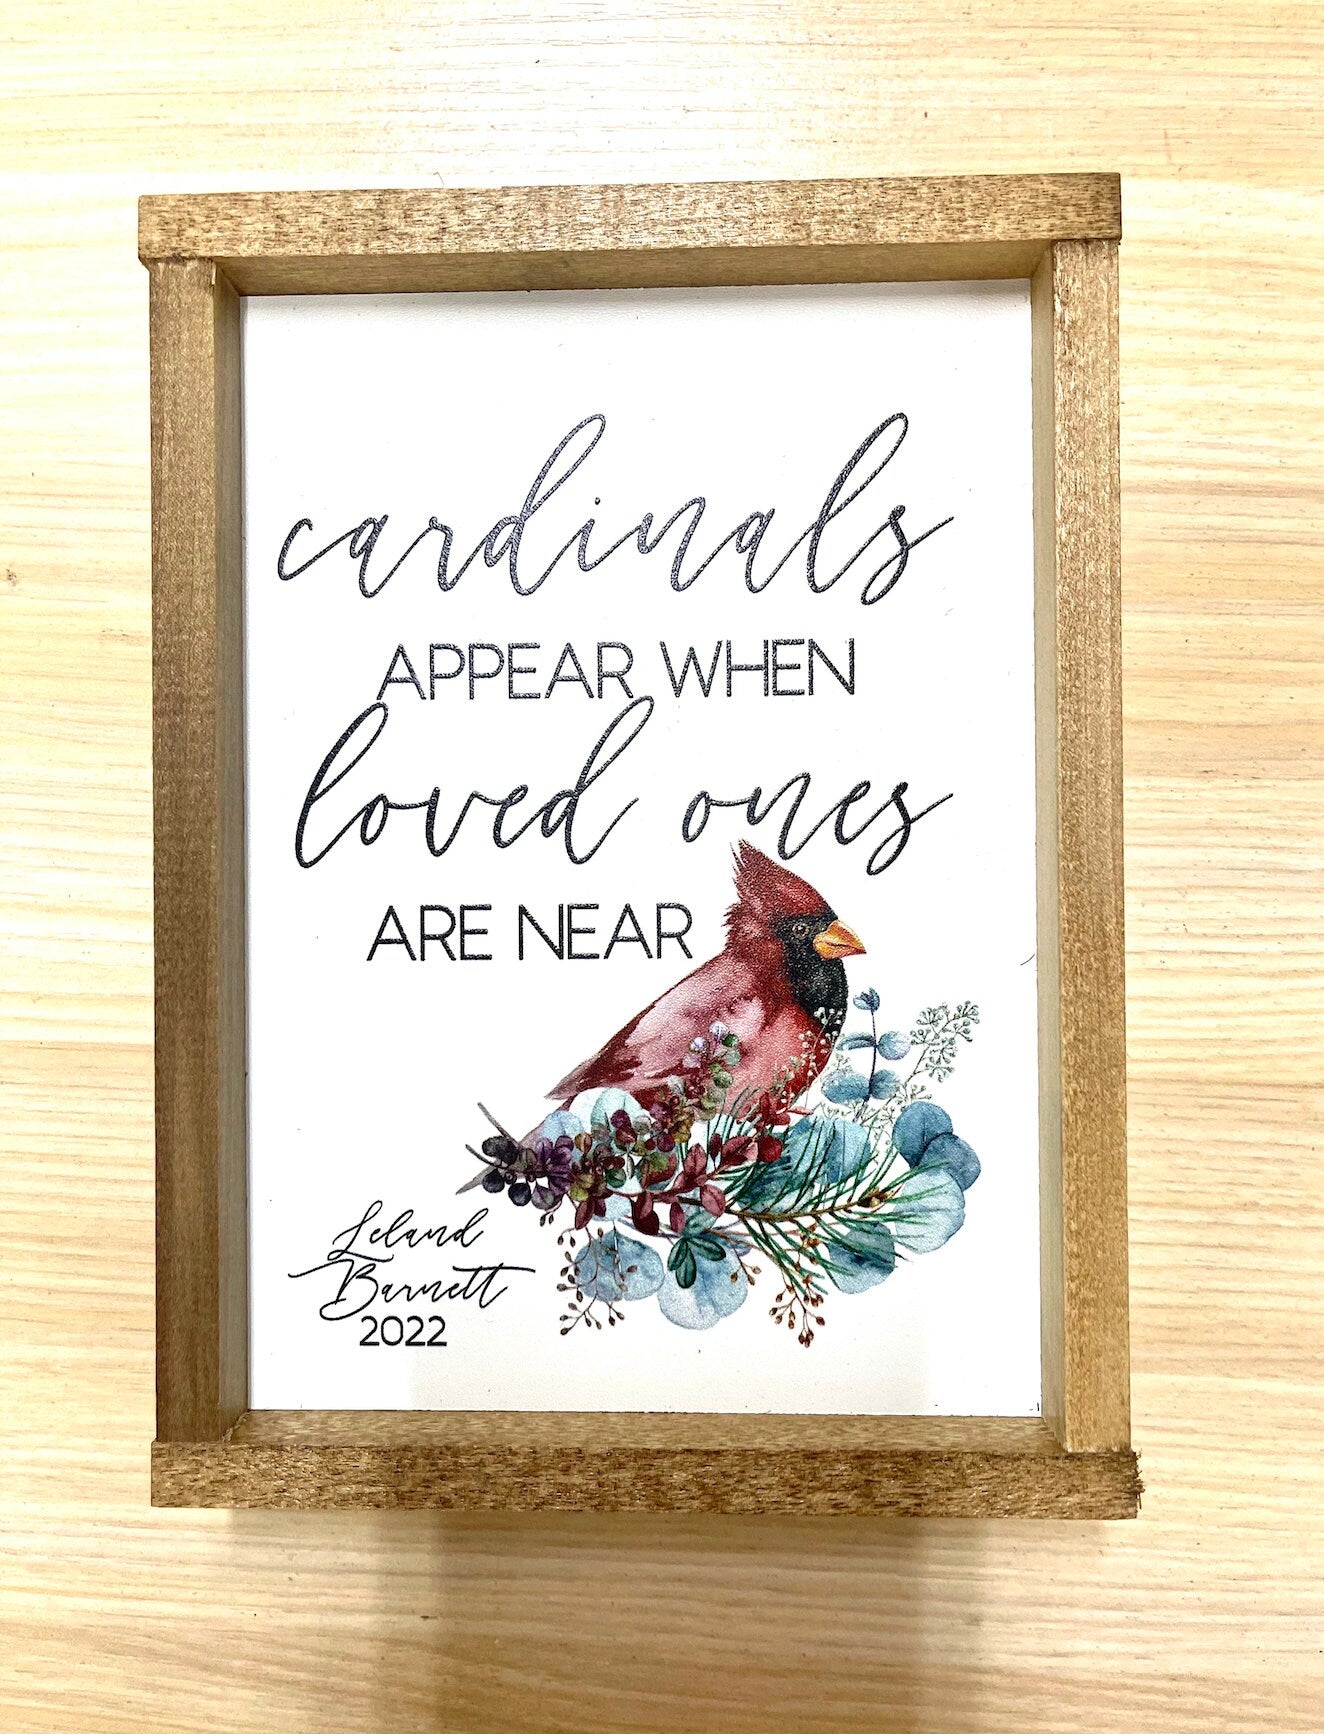 Custom personalized Cardinals Appear when loved ones are near in loving memory christmas wood sign